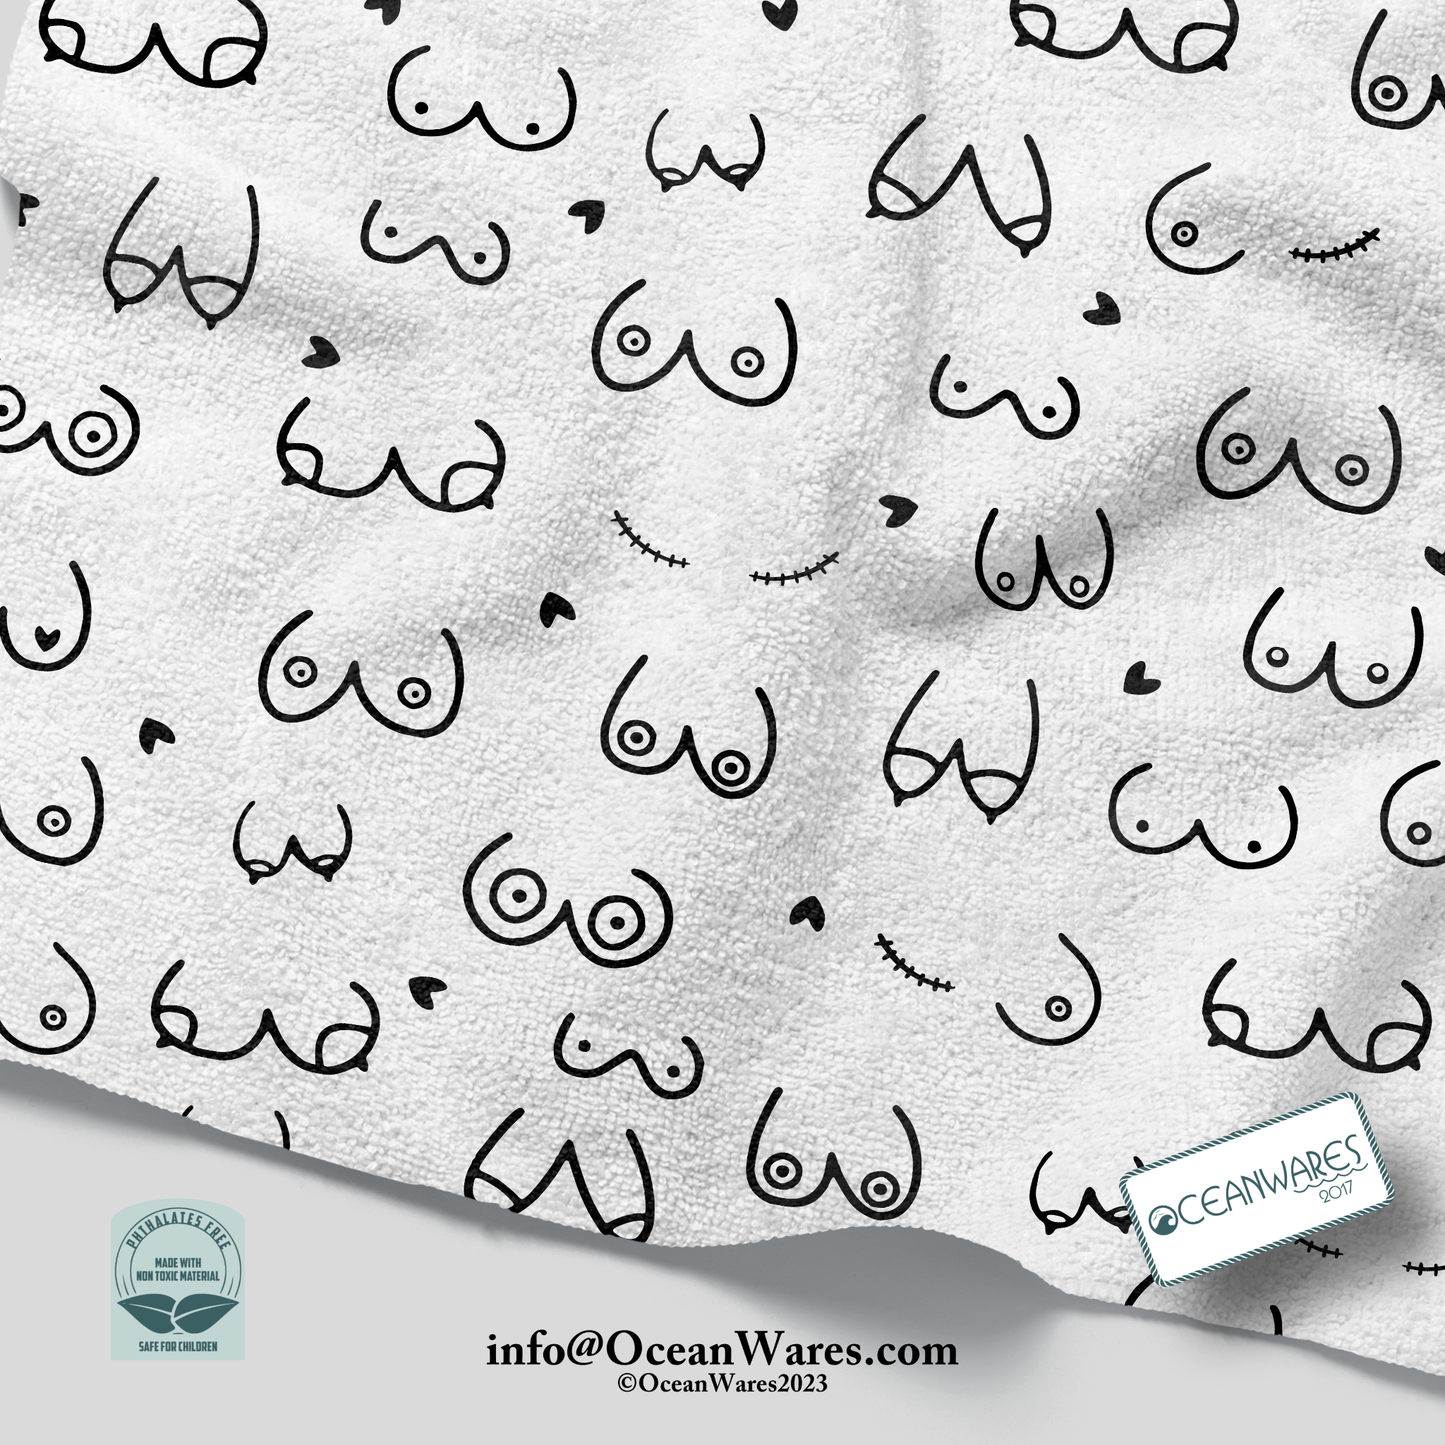 Mastectomy Boobies from the Cheeky Clean Washcloth Collection, Body Empowerment, Hand-Drawn Line Art,